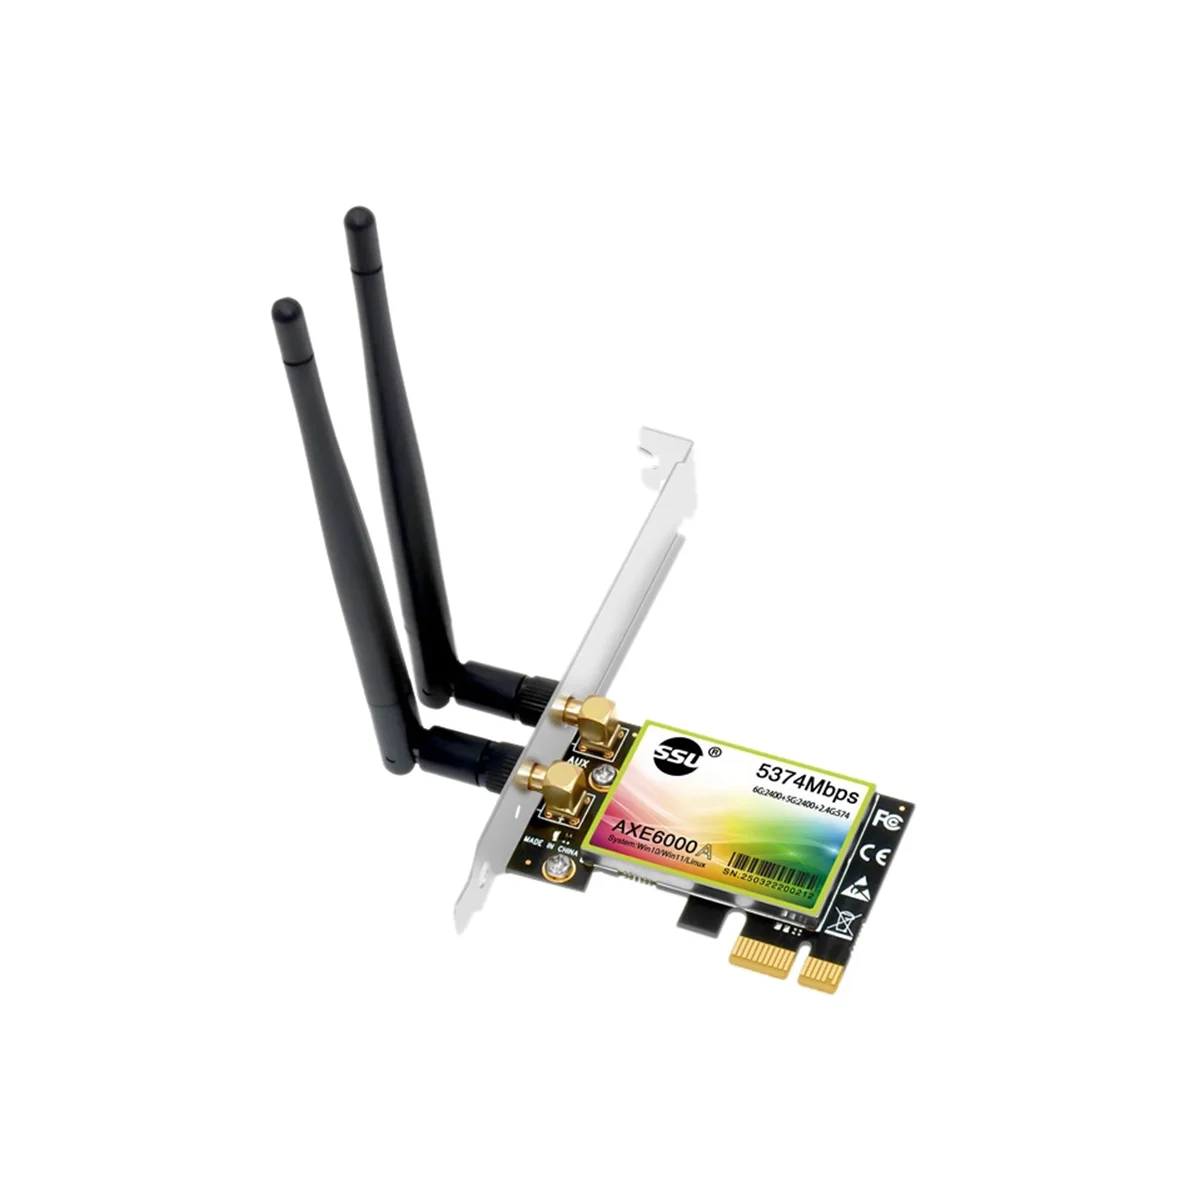 

SSU 5374Mbps WiFi6E PCIe Adaptor Dual-Band 2.4G/5GHz WiFi Card PCI-Express Wireless Card Adapter for PC Computer AXE6000(A)